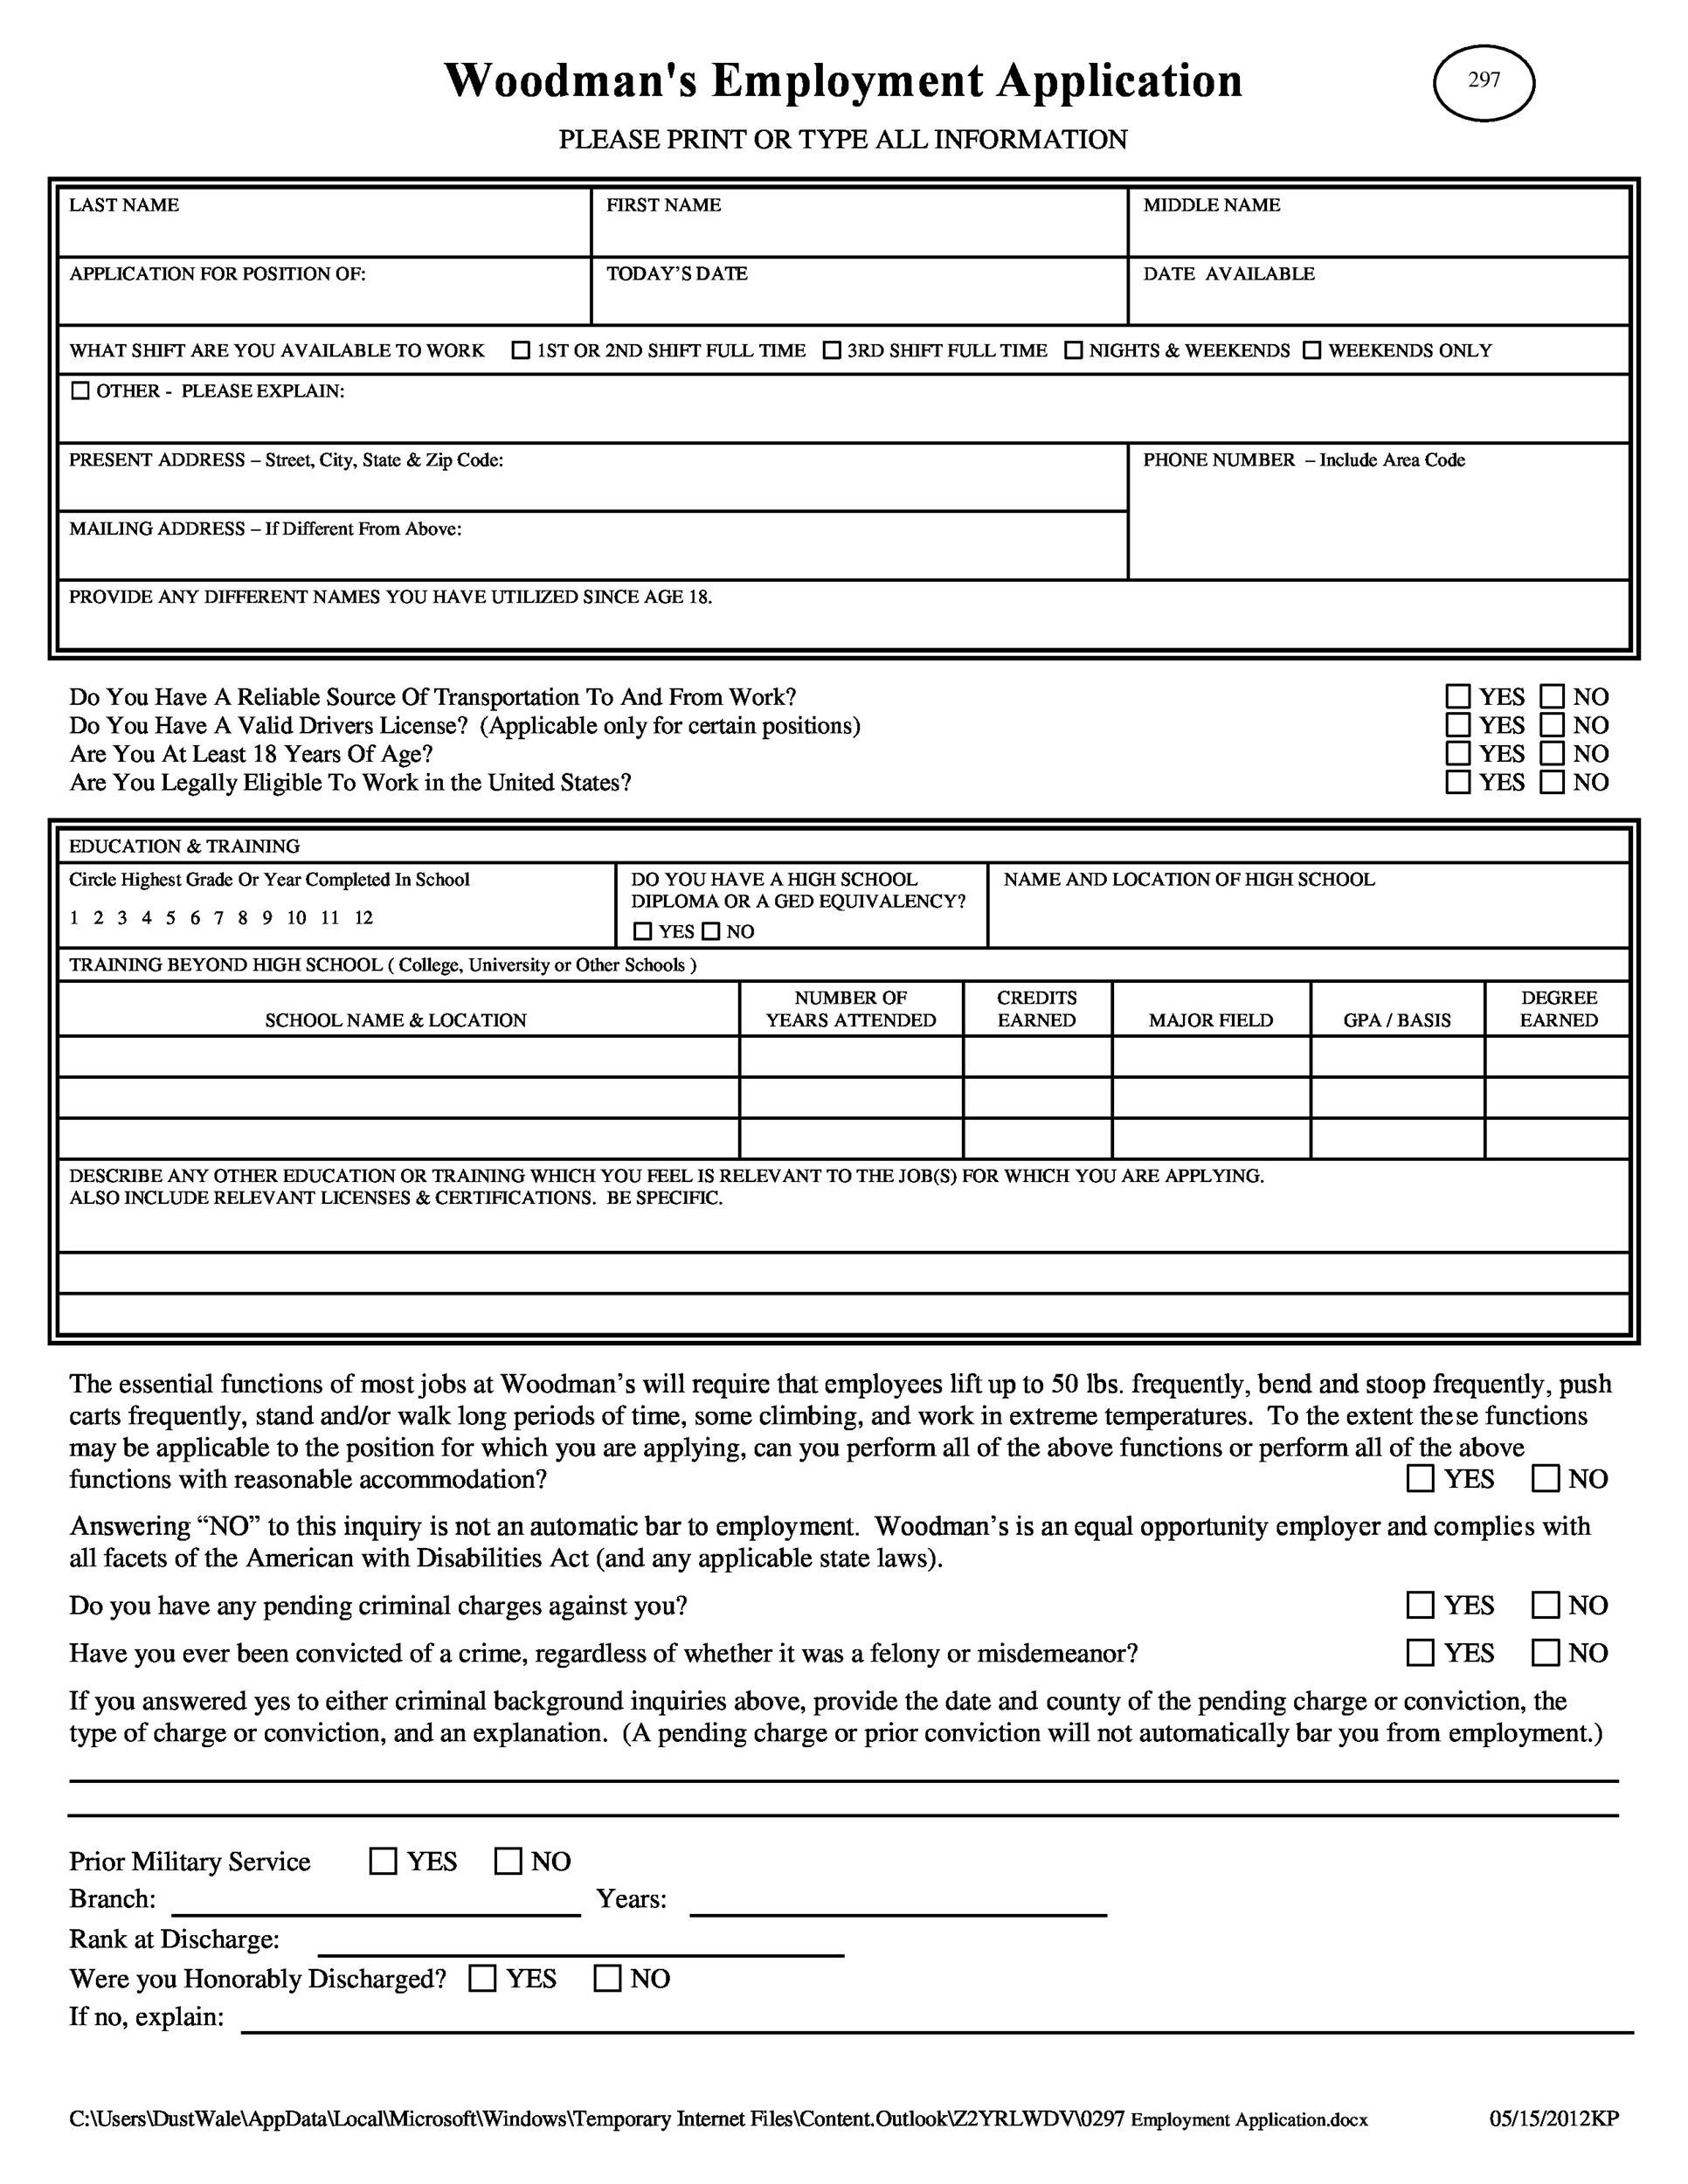 Free employment application template 07